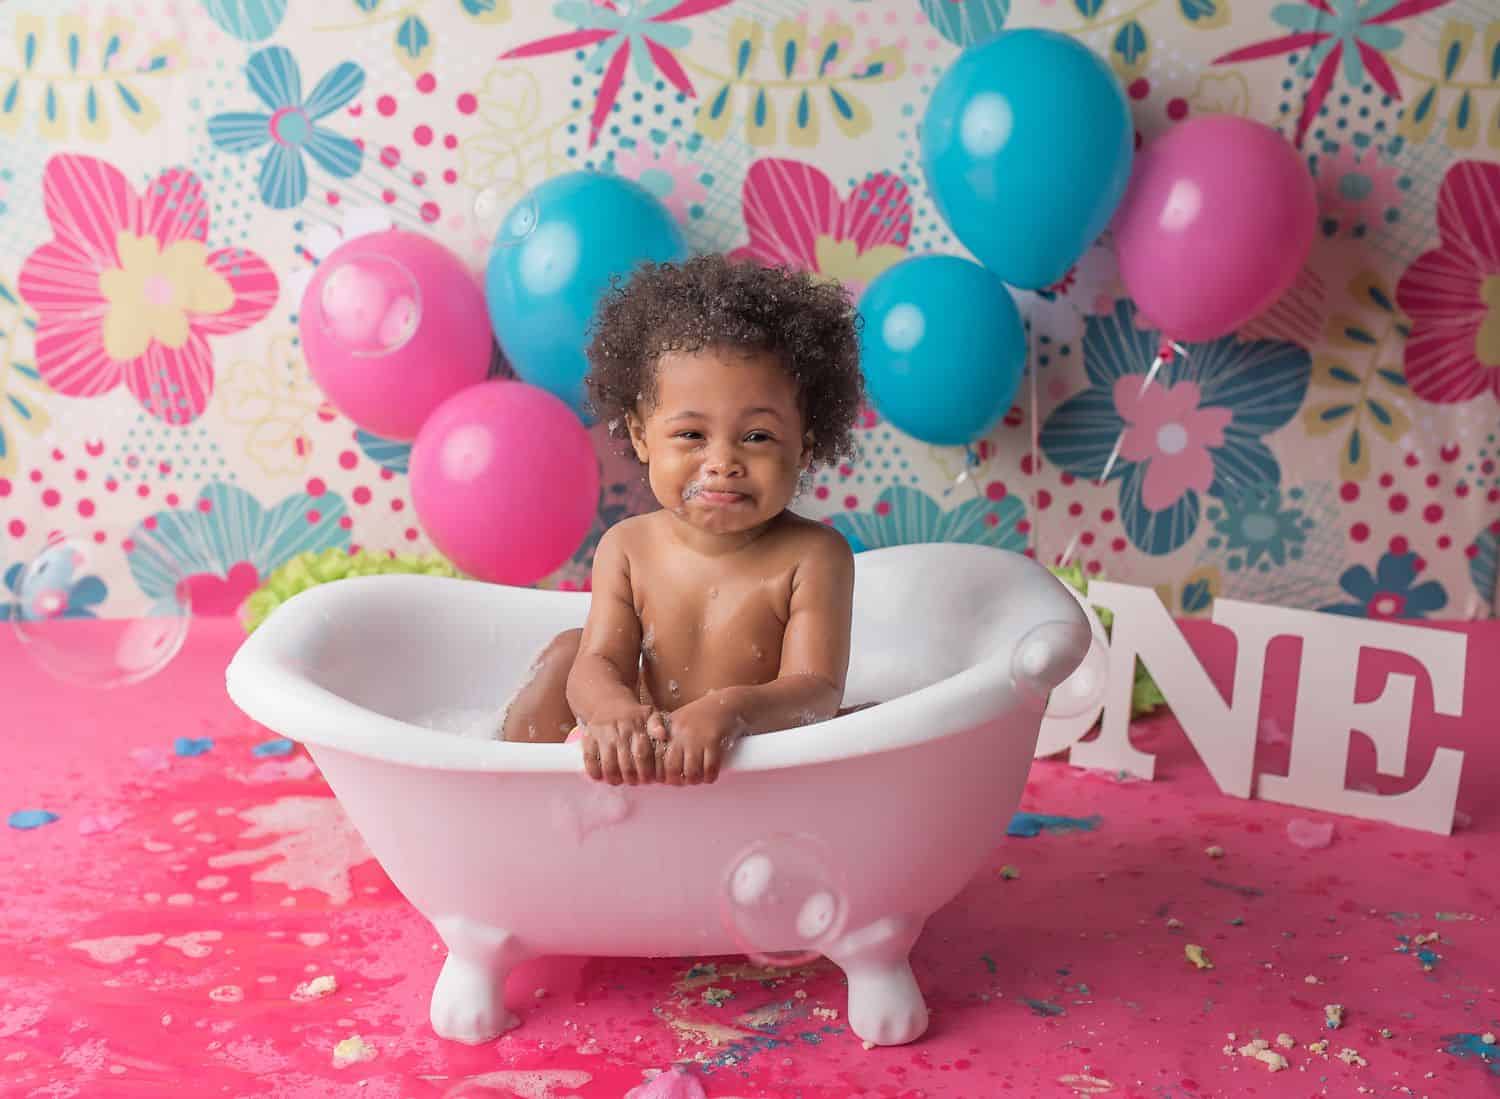 The best toddler photography props include this miniature claw-foot bathtub. Fill it with soap bubbles and set it up in a waterproof area, then let the splashing commence!